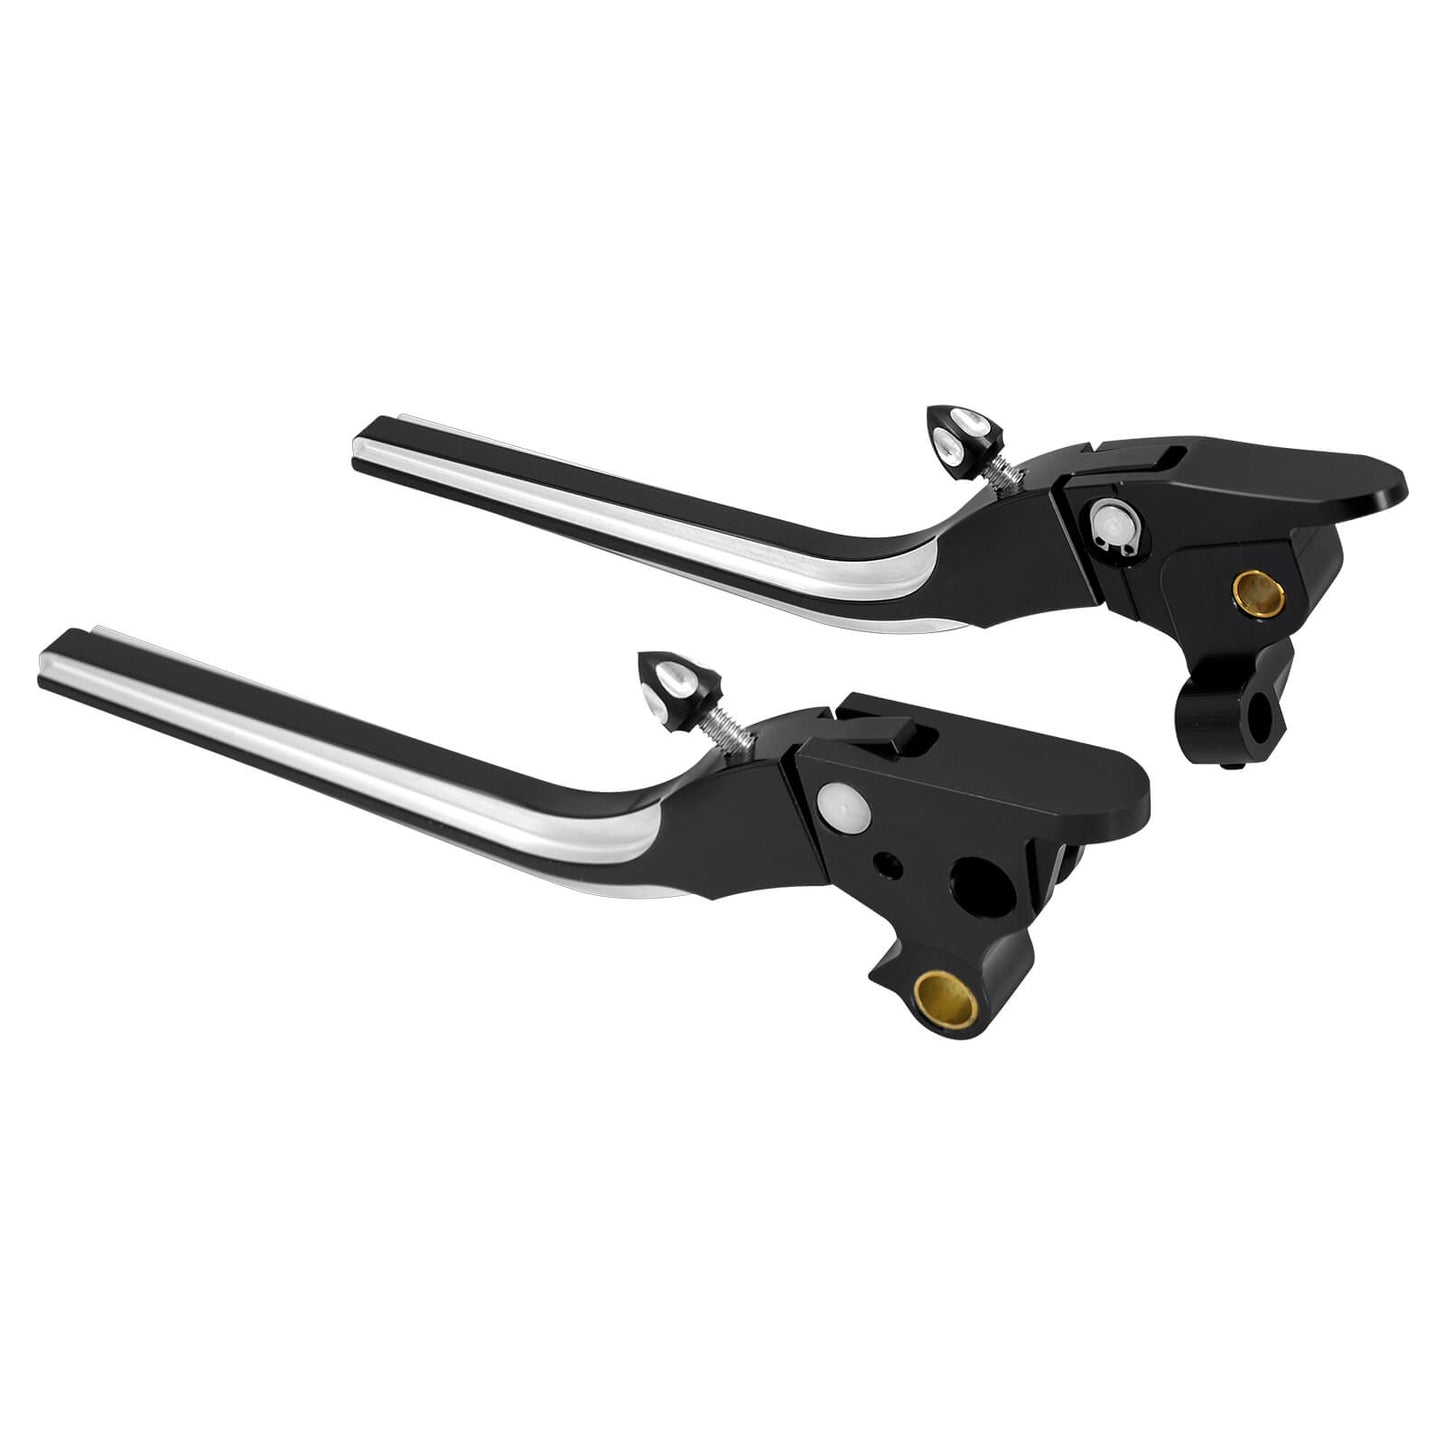 Brake Clutch Levers Fit For Harley Touring 09-13 | Mactions